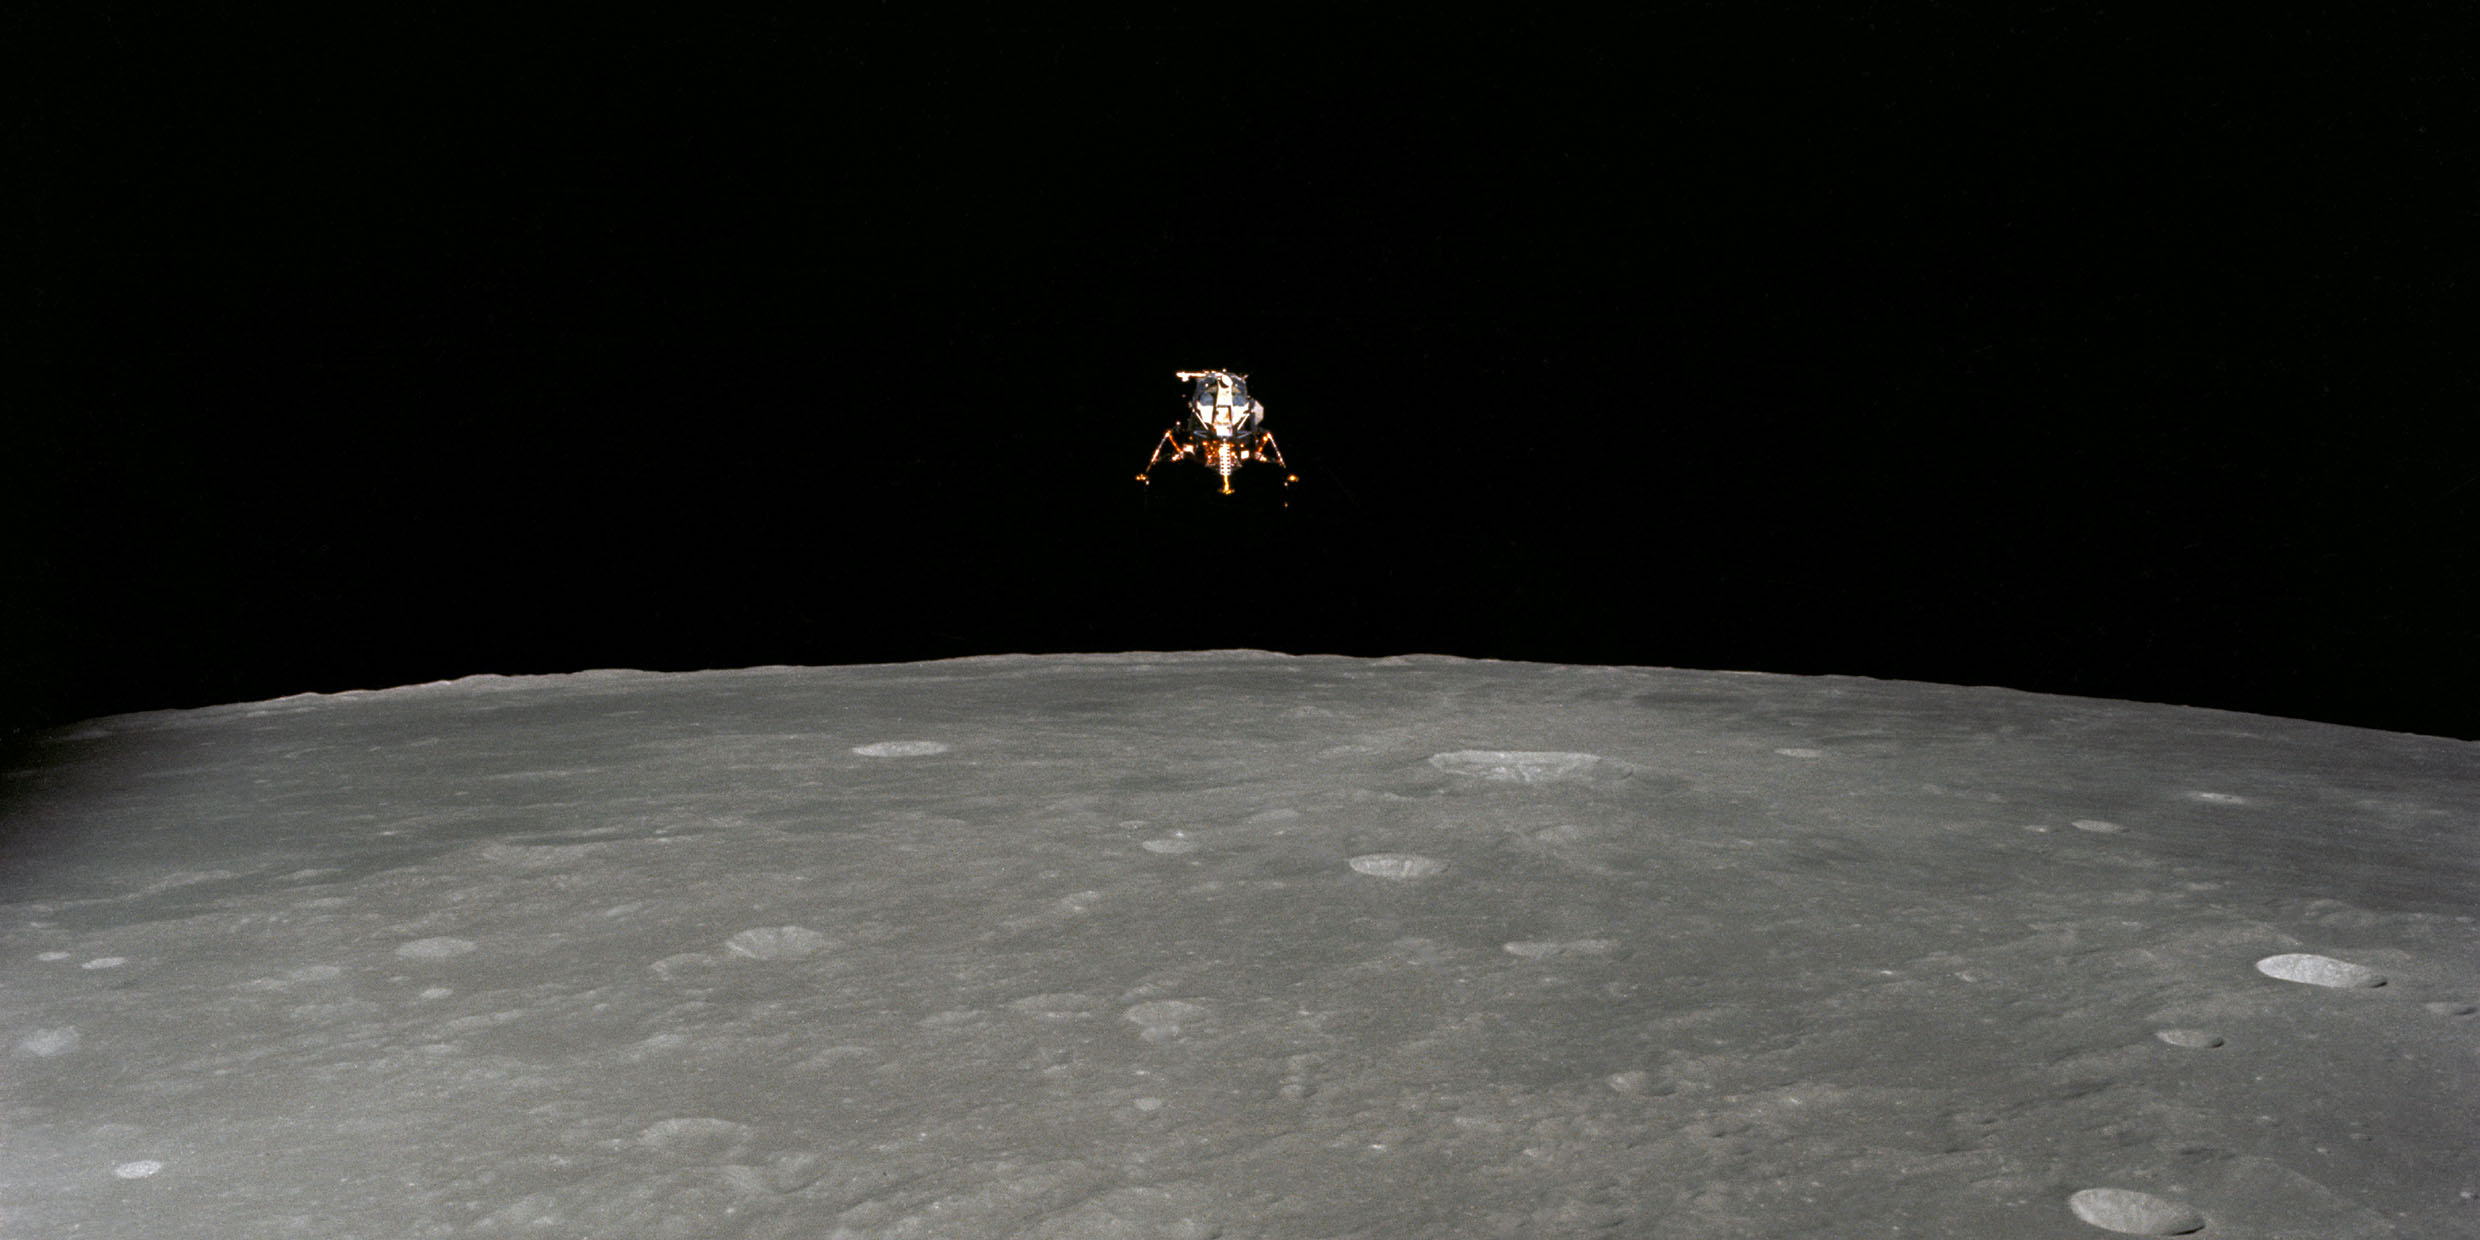 Image of an Apollo spacecraft flying over the surface of the Moon